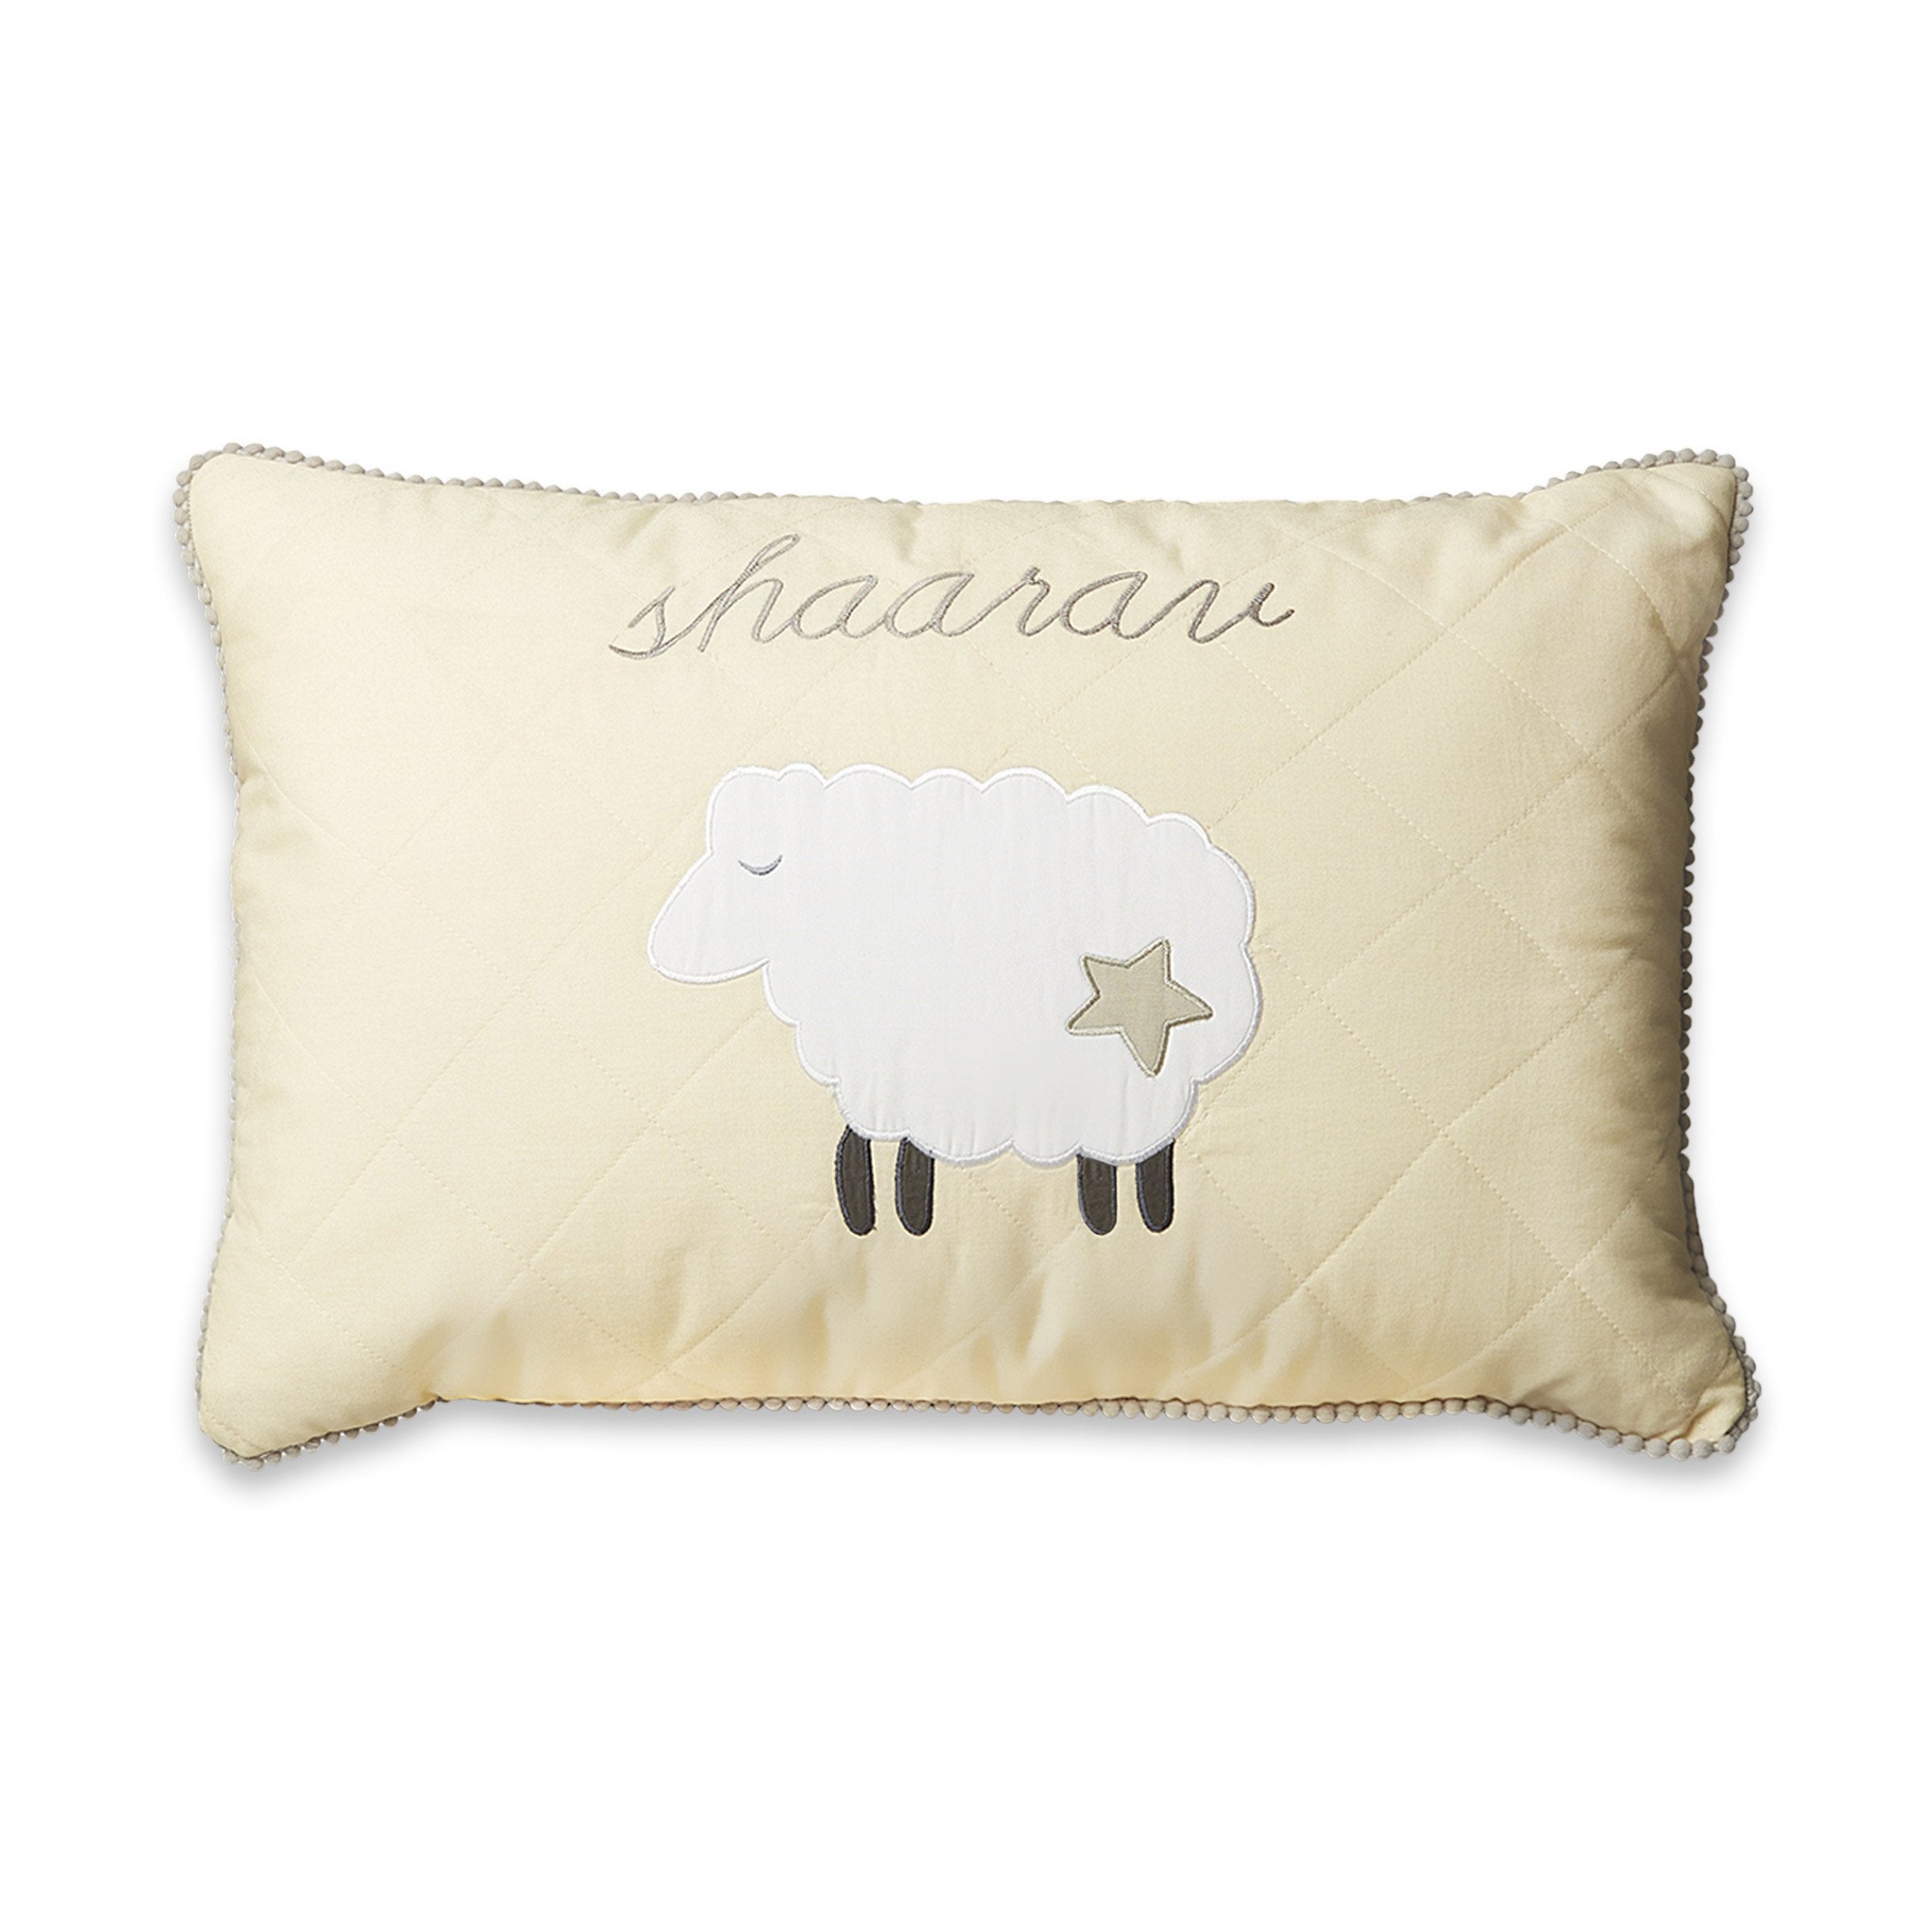 Masilo Personalised Throw Cushion Cover with filler  - Counting Sheep (Cream)